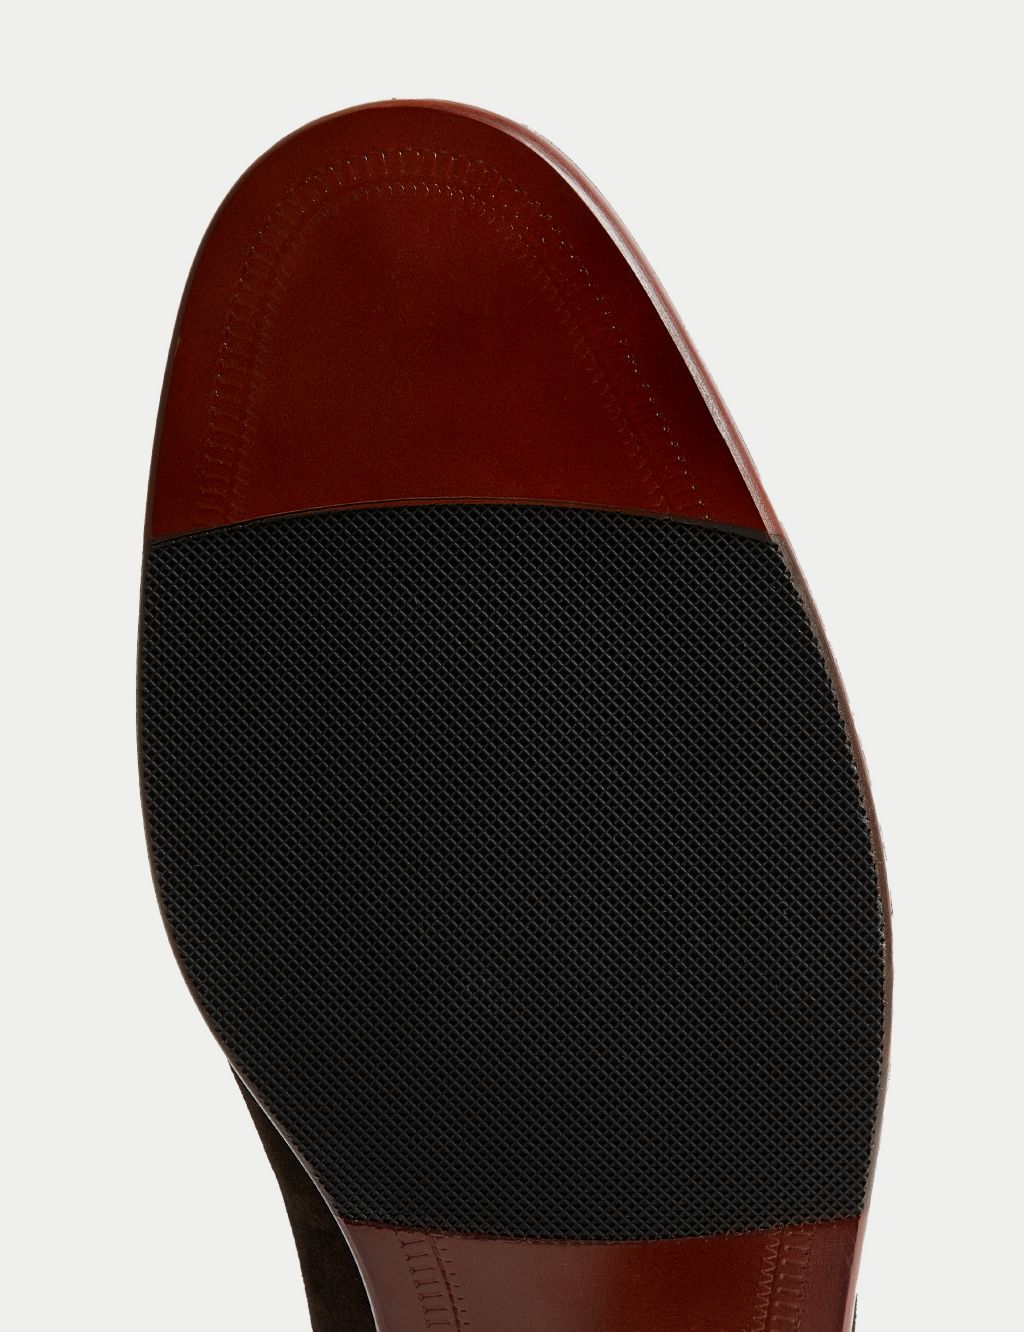 Suede Slip-On Loafers image 4